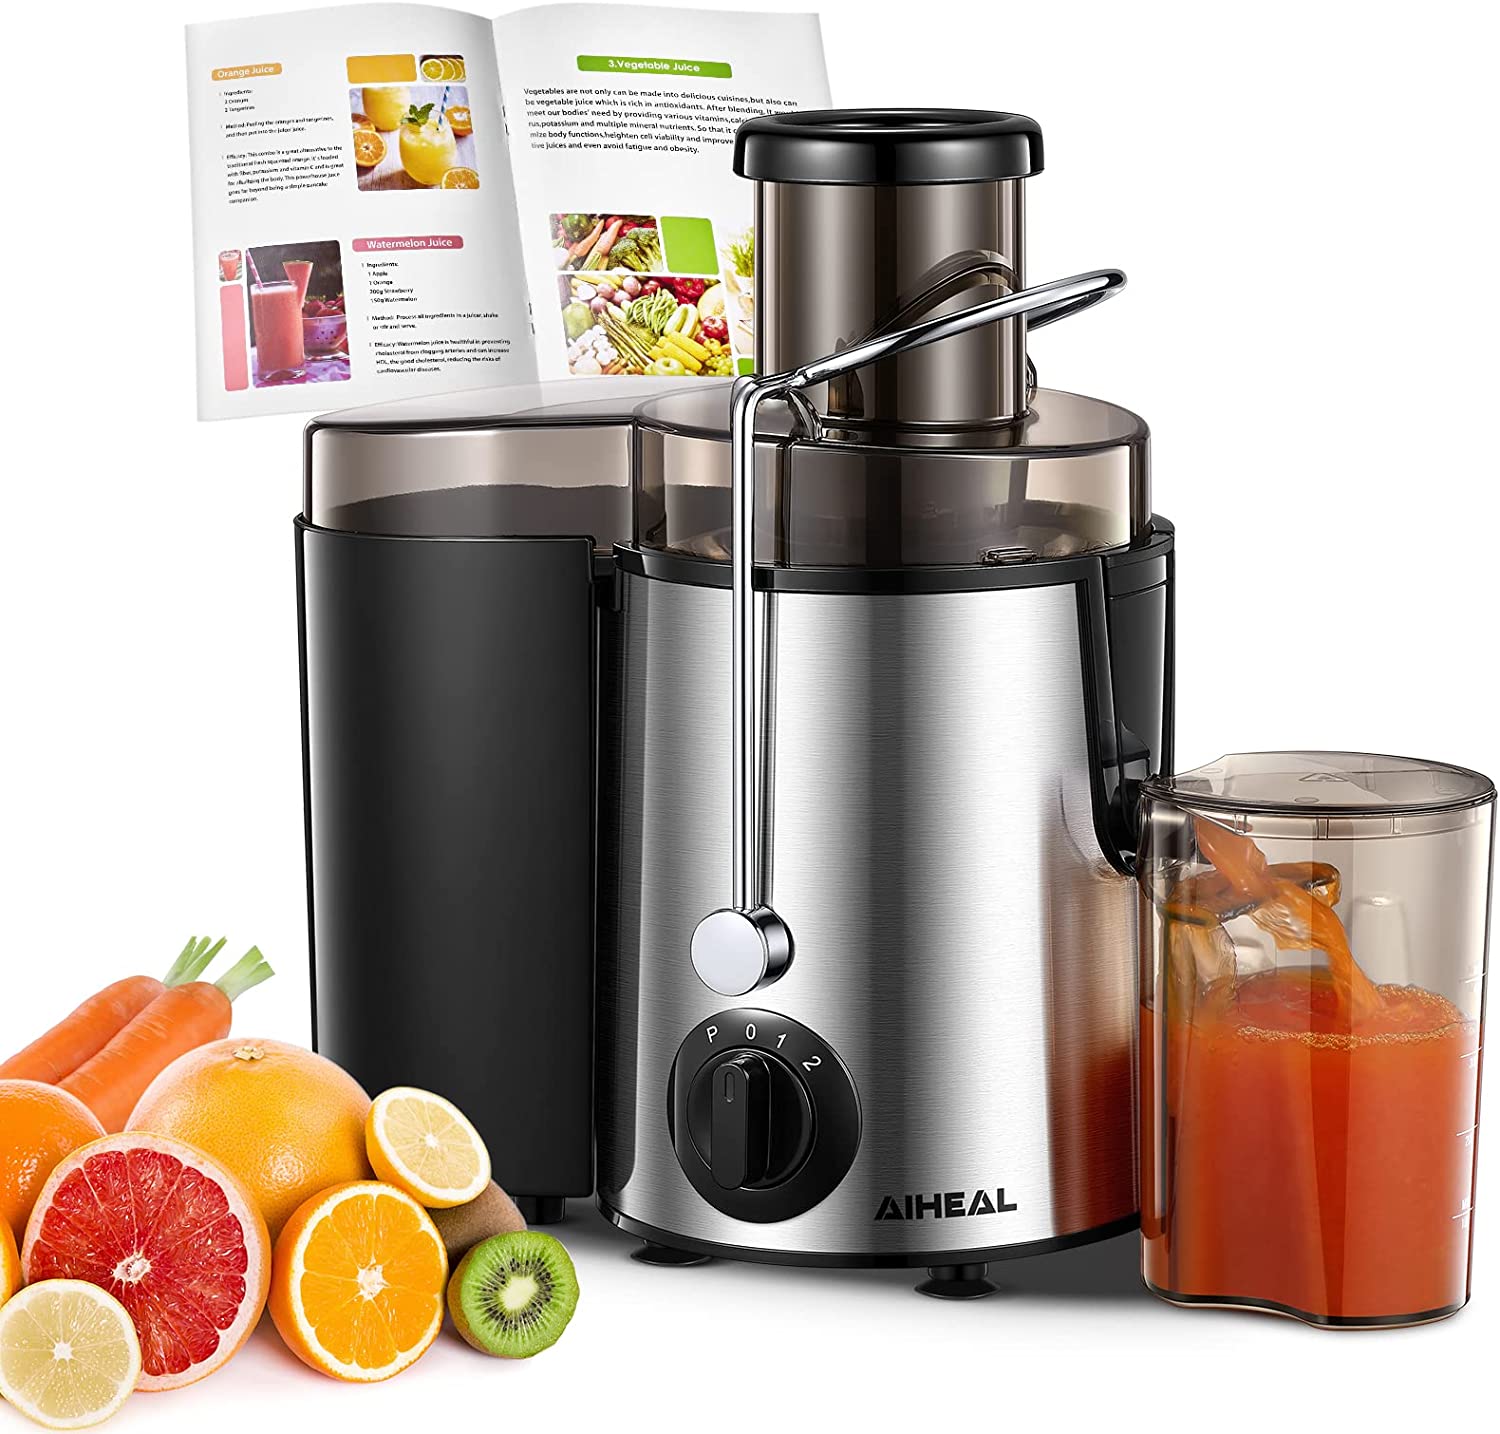 Juicer AIHEAL Juicer Machines Vegetable and Fruit Easy to Clean